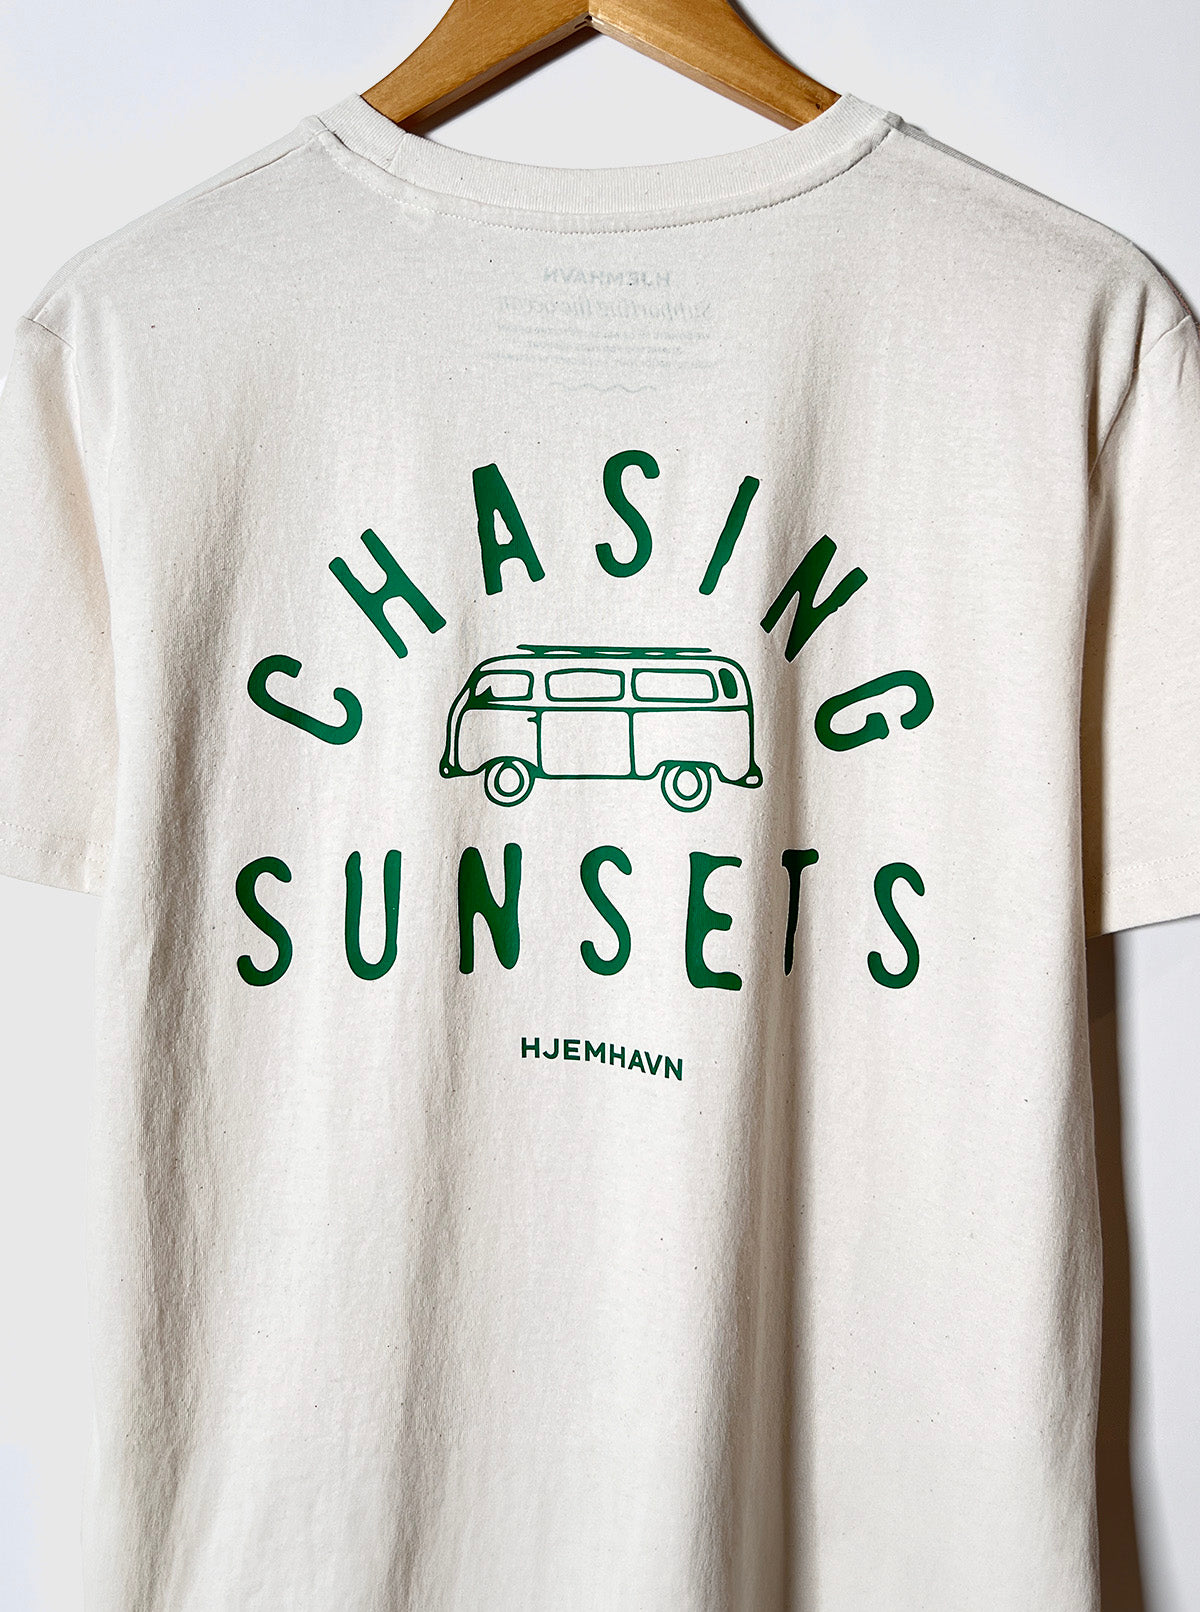 Tee "Chasing Sunsets"